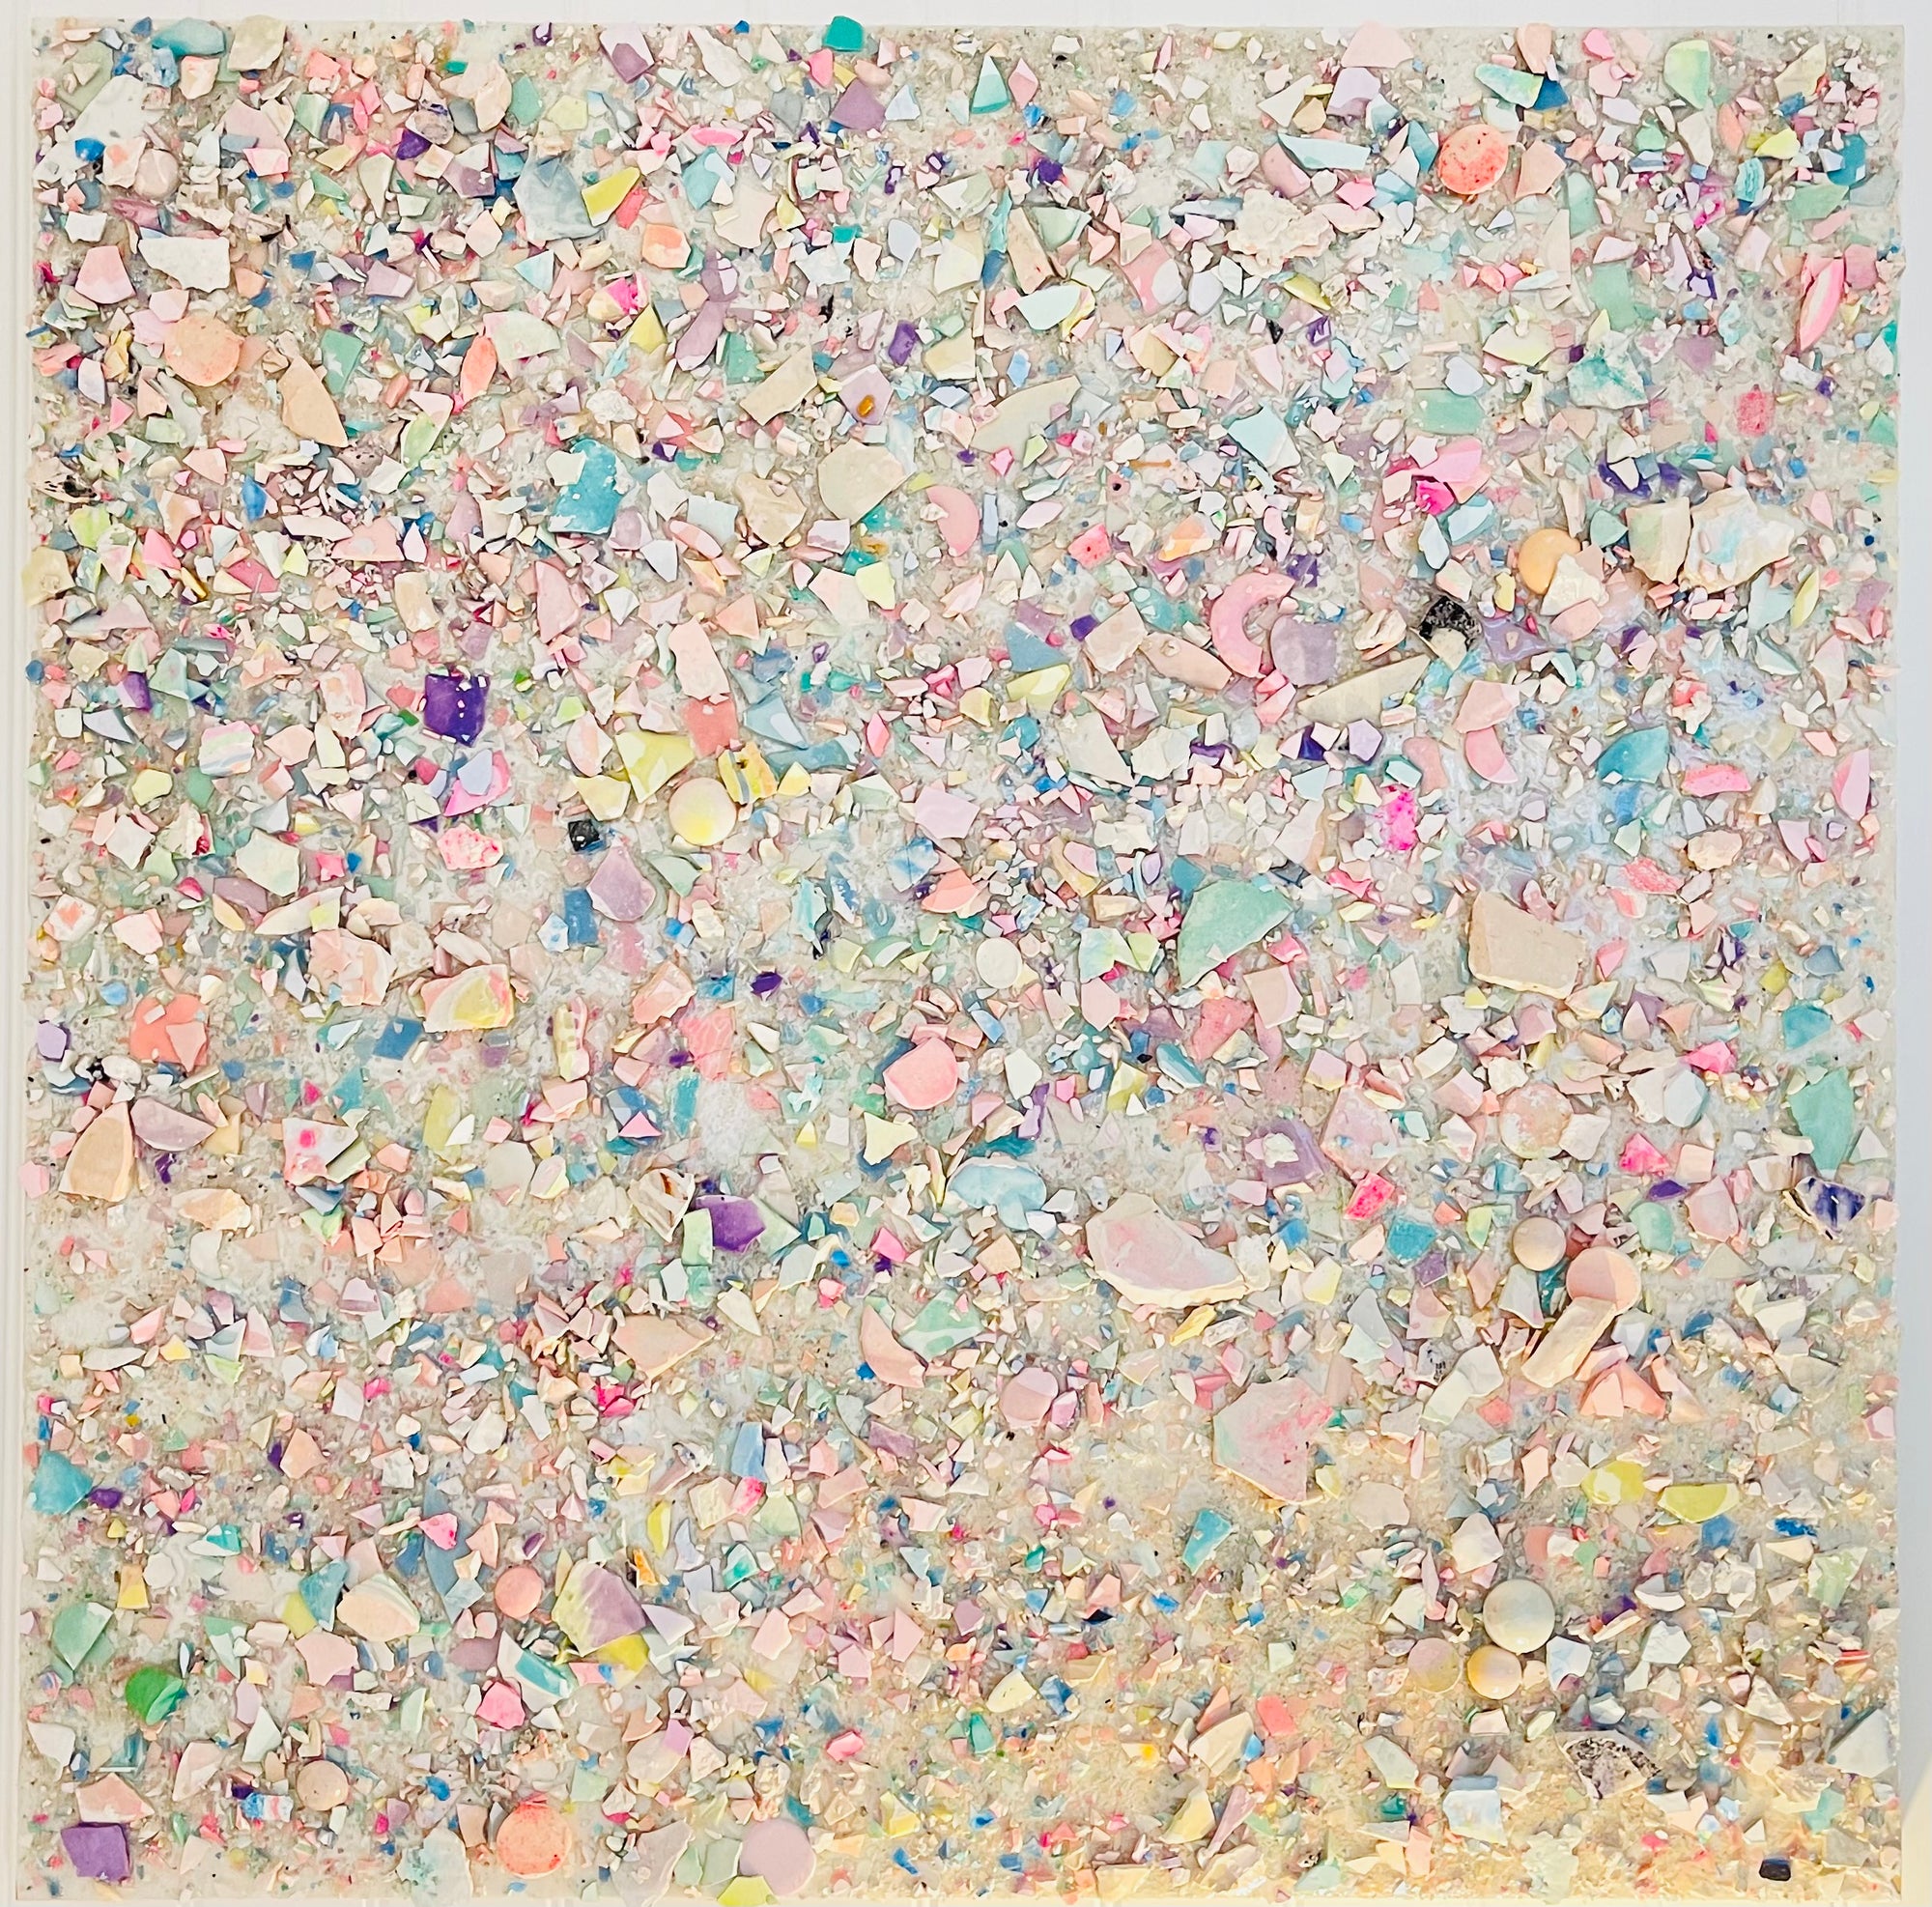 A textural abstract painting made from shards of pastel plaster and jesmonite finished with epoxy resin measuring 100cm x 100cm.